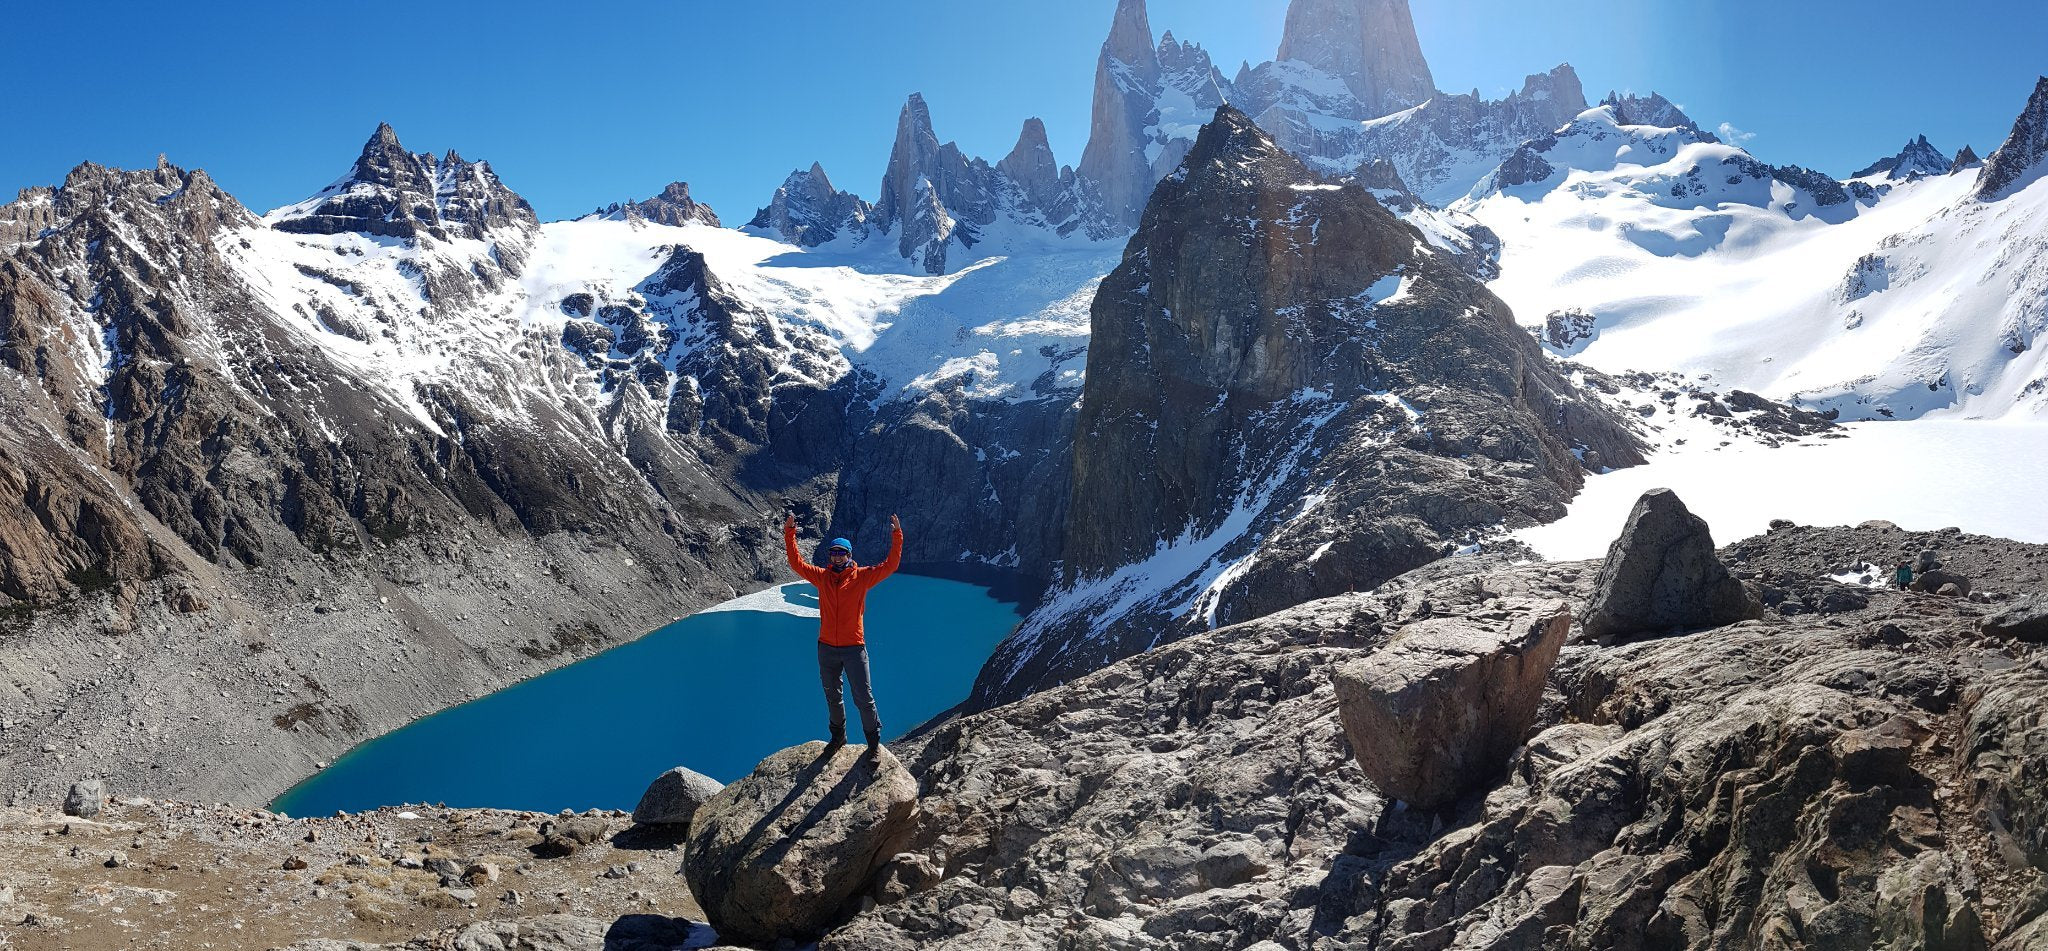 Instructor posing in front of Cerro Torre Patagonia